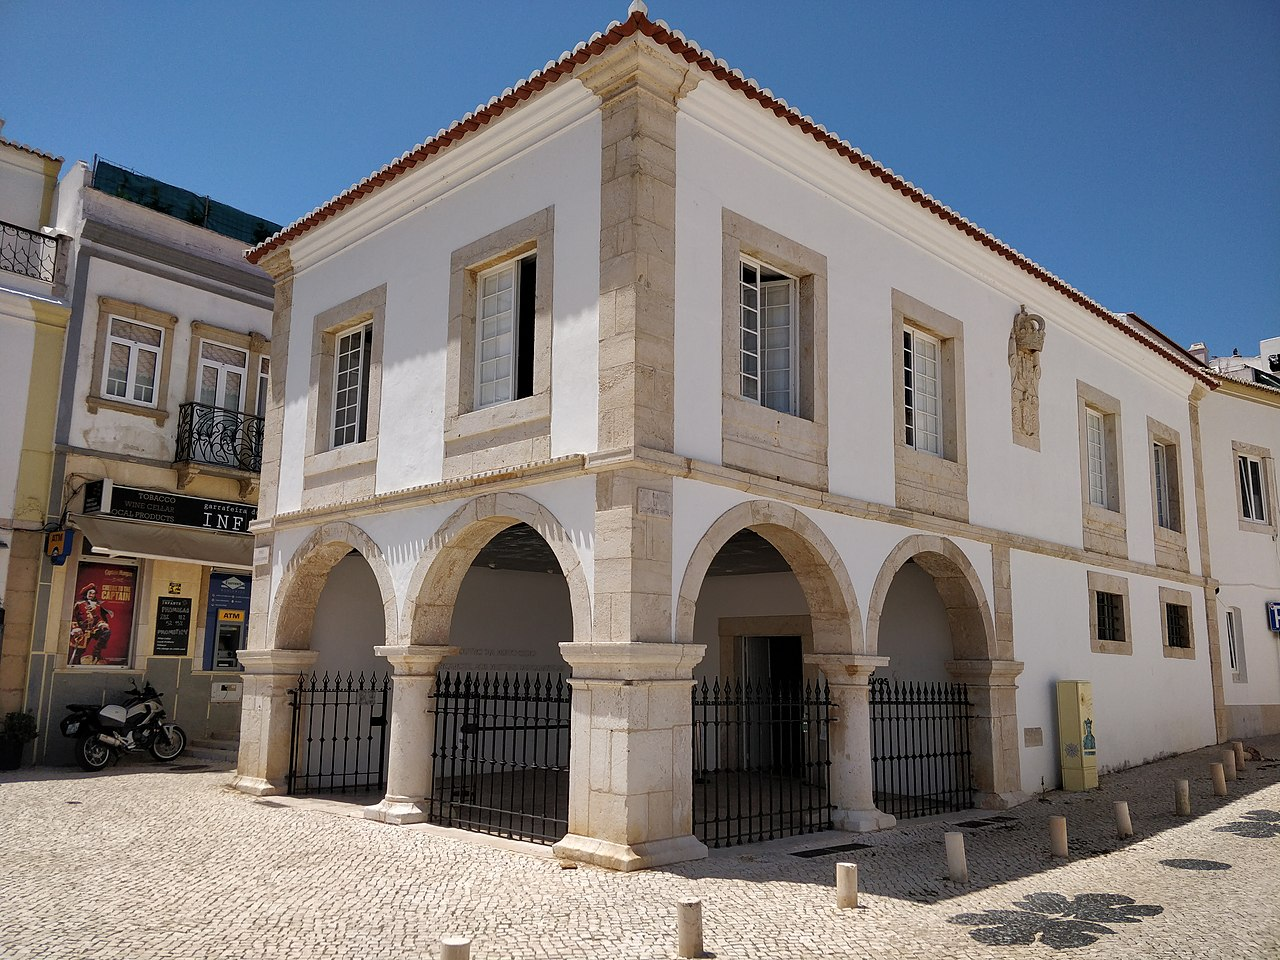 An image of the Slave Market in Lago, Portugal showcasing the historical site and its significance.